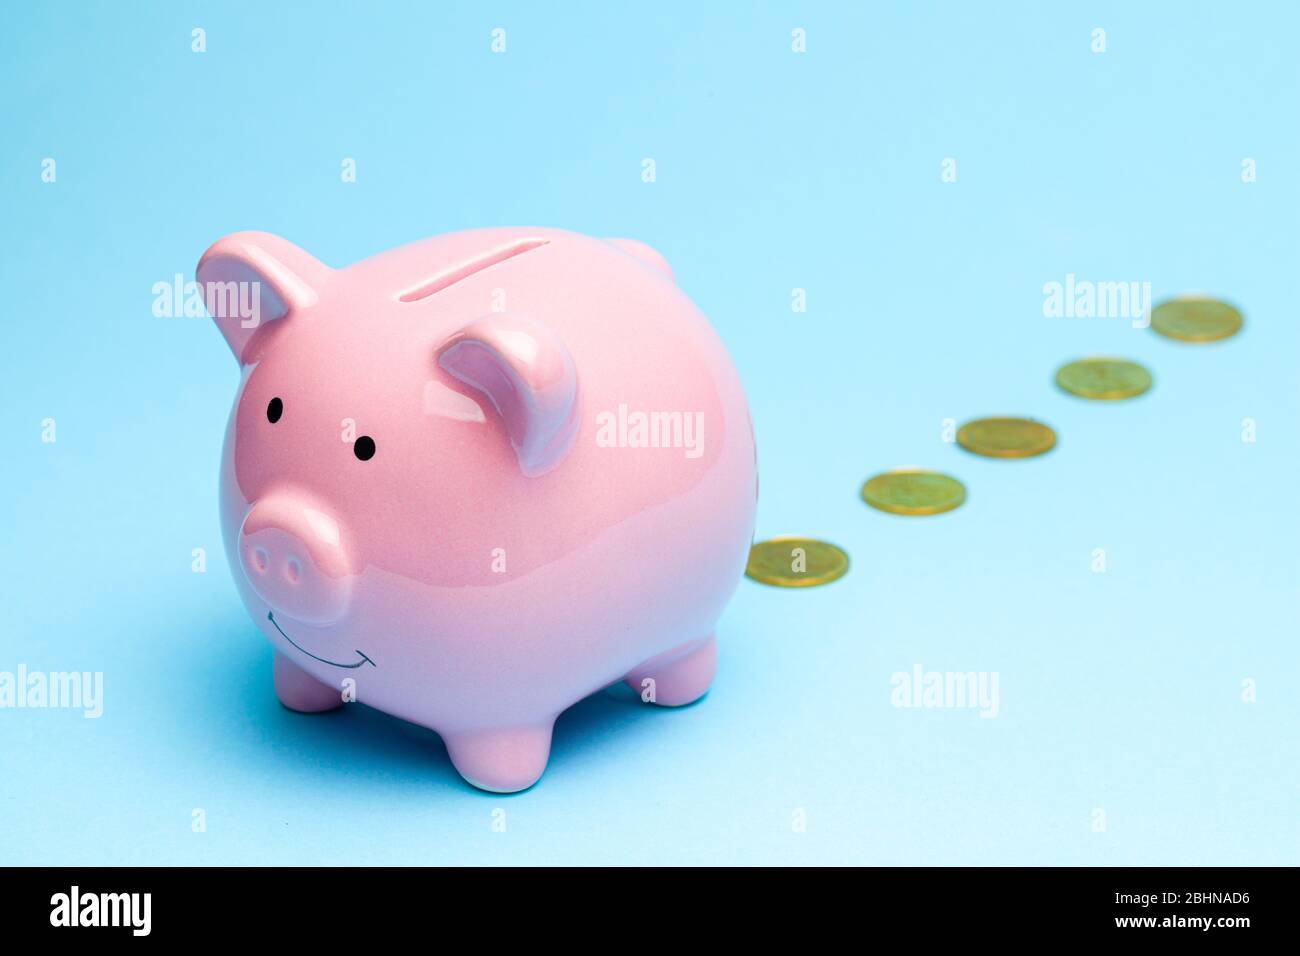 Loss of money. Pink piggy bank losing gold coins on blue background. Bad investment or falling profits. Stock Photo